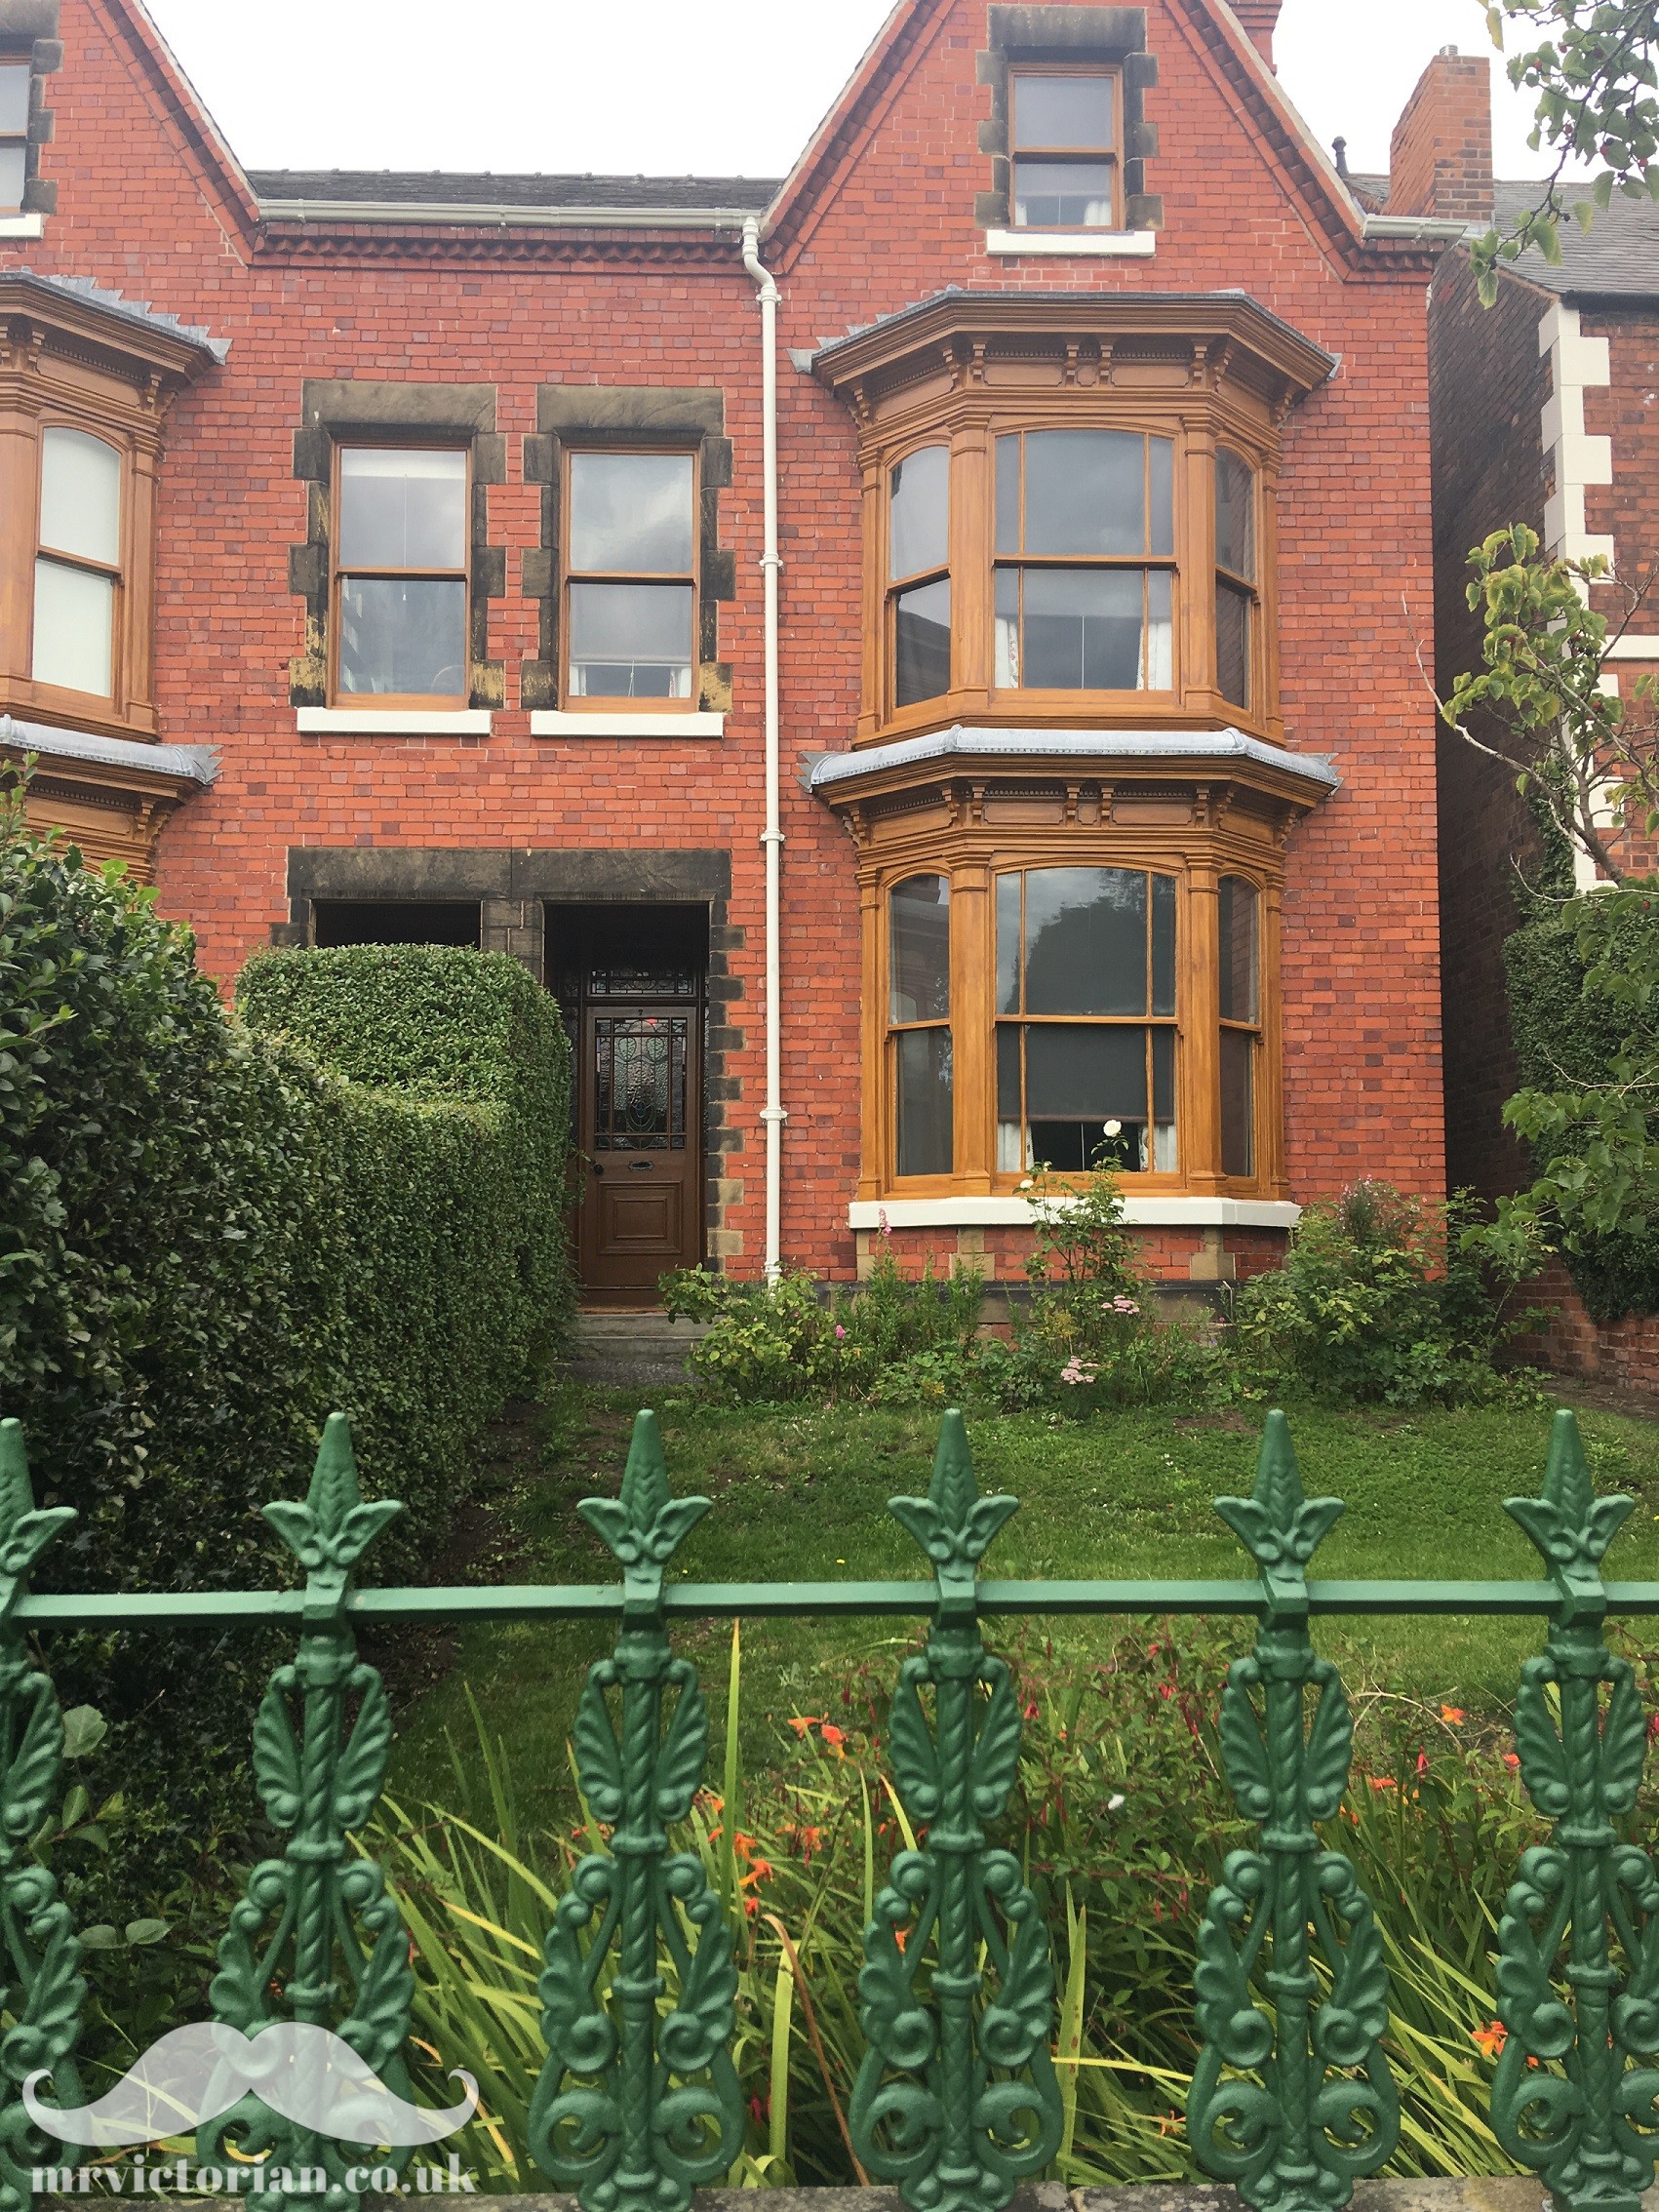 Mr Straw's House showing woodgrained windows and green Edwardian railings